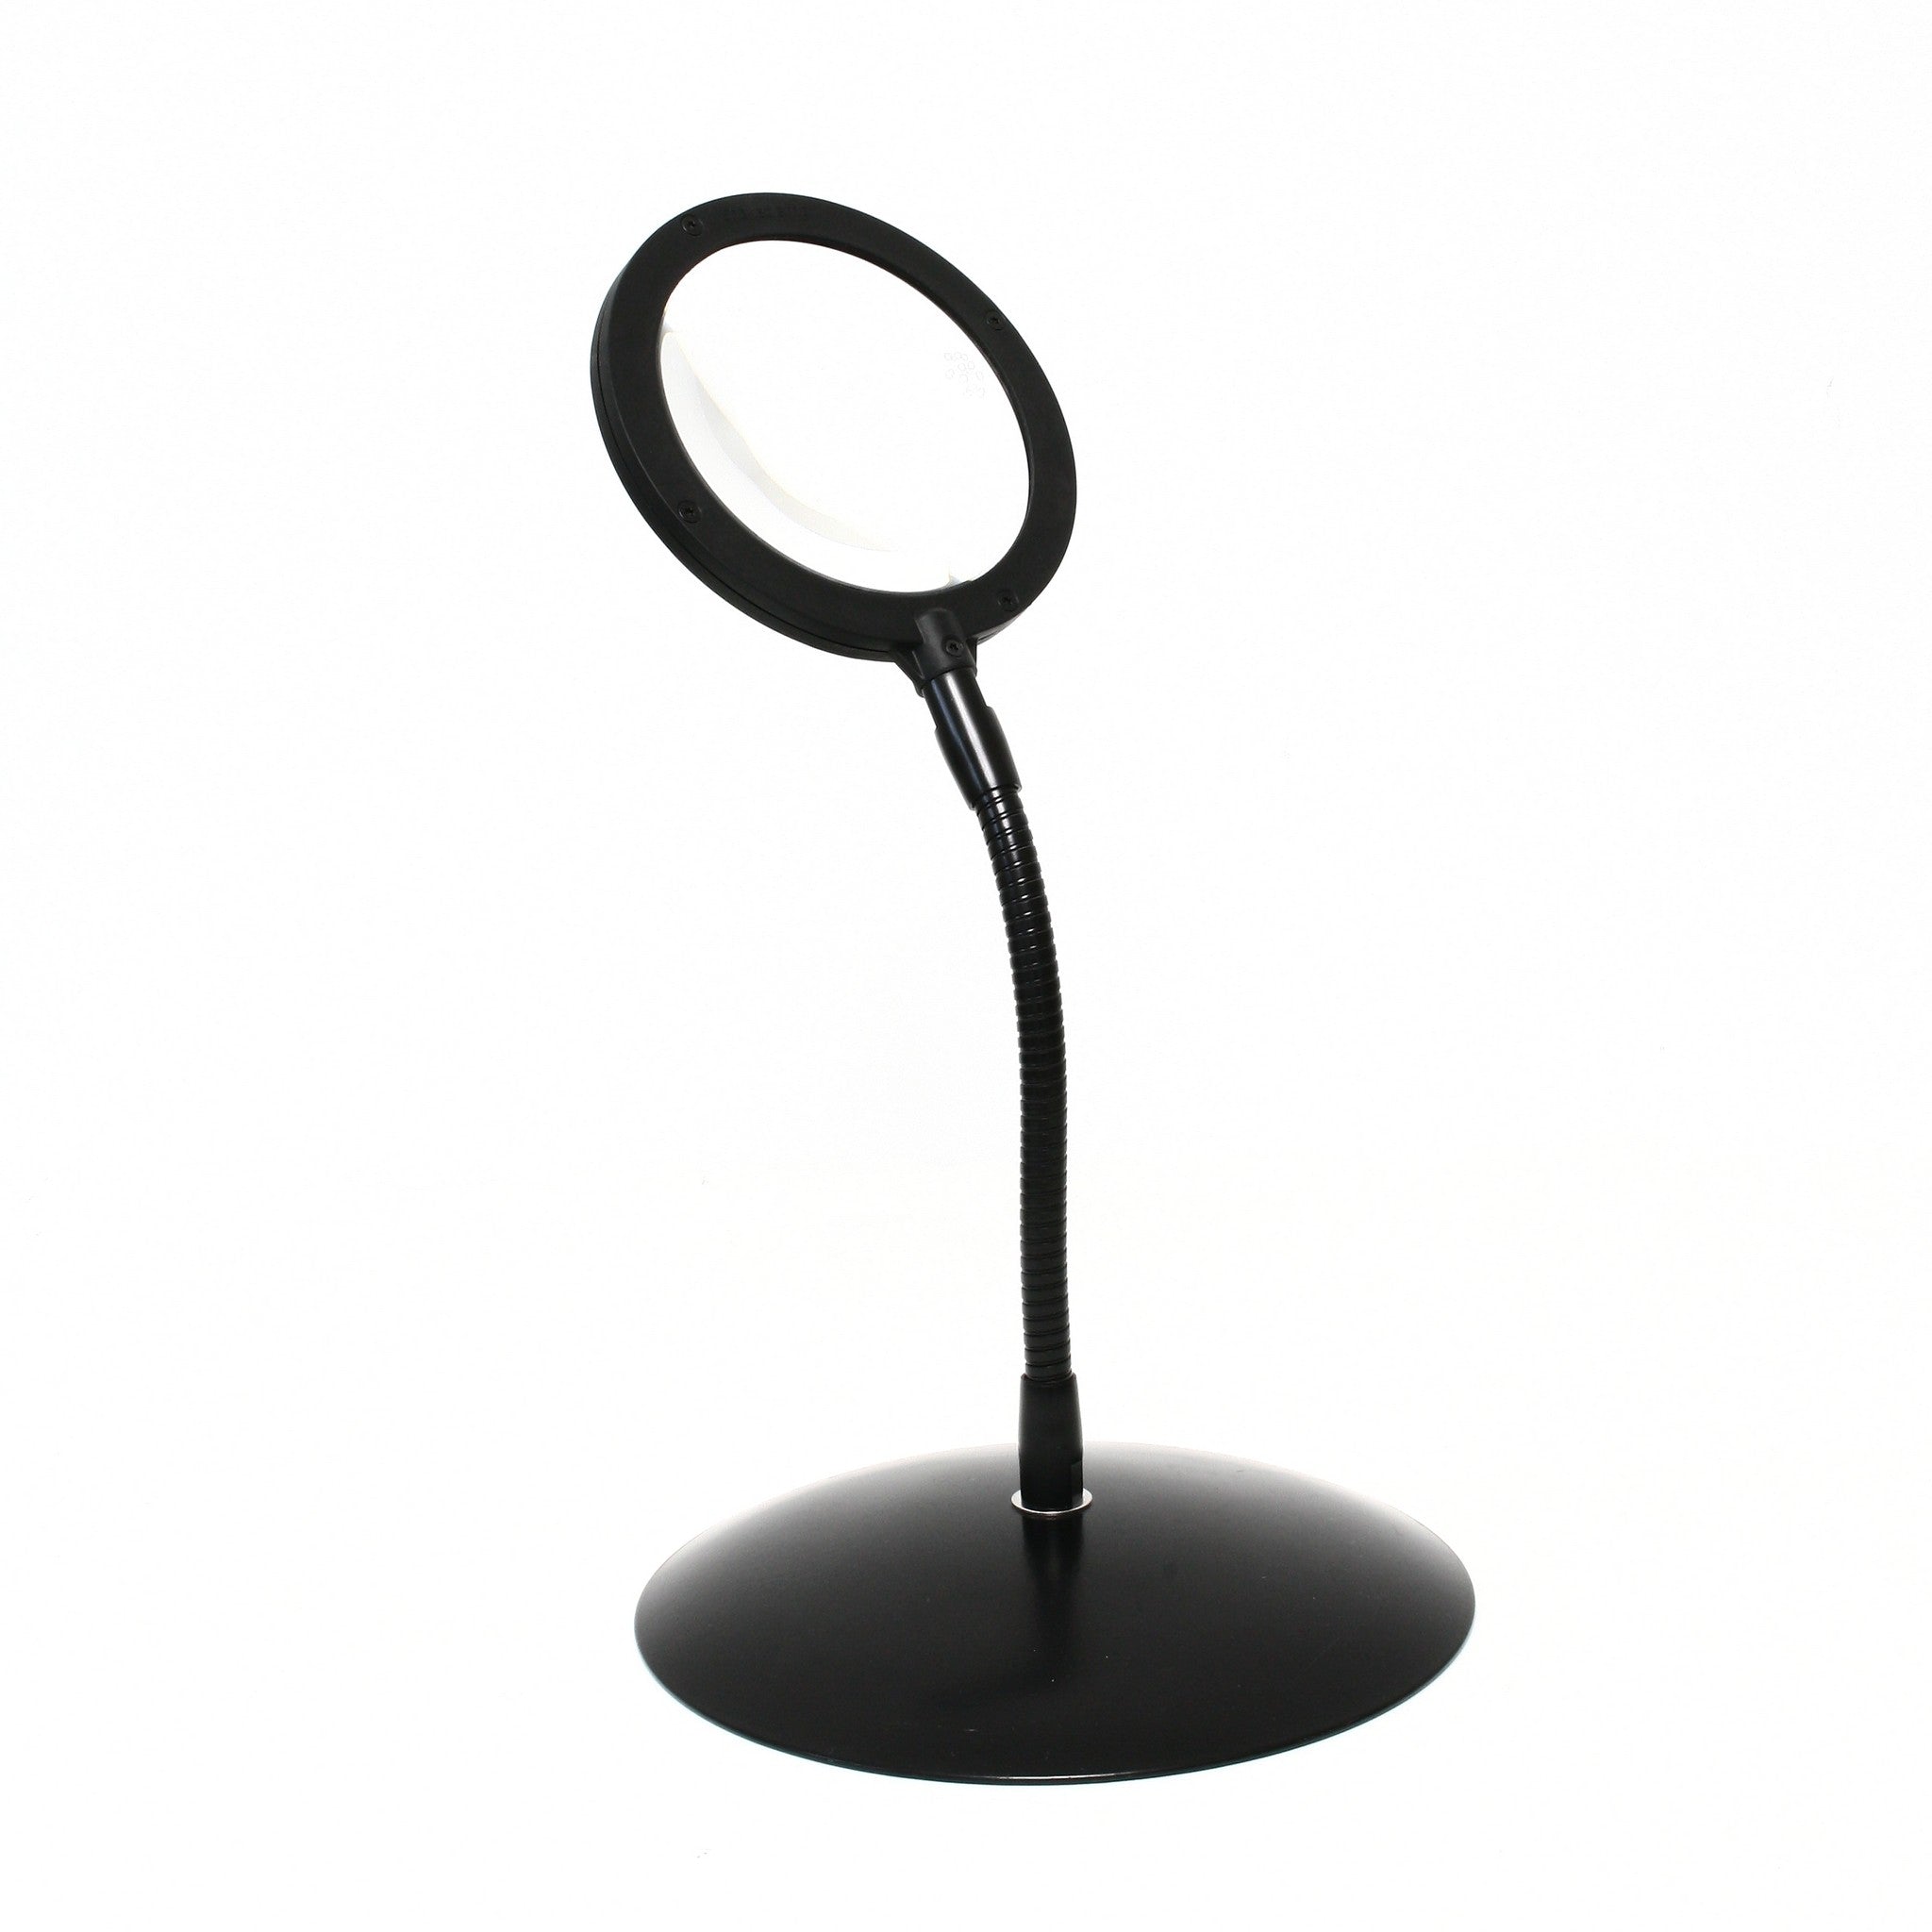 ROUND 5X MAGNIFIER LAMP WITH STAND -NEW DESIGN WITH FLEX ARM